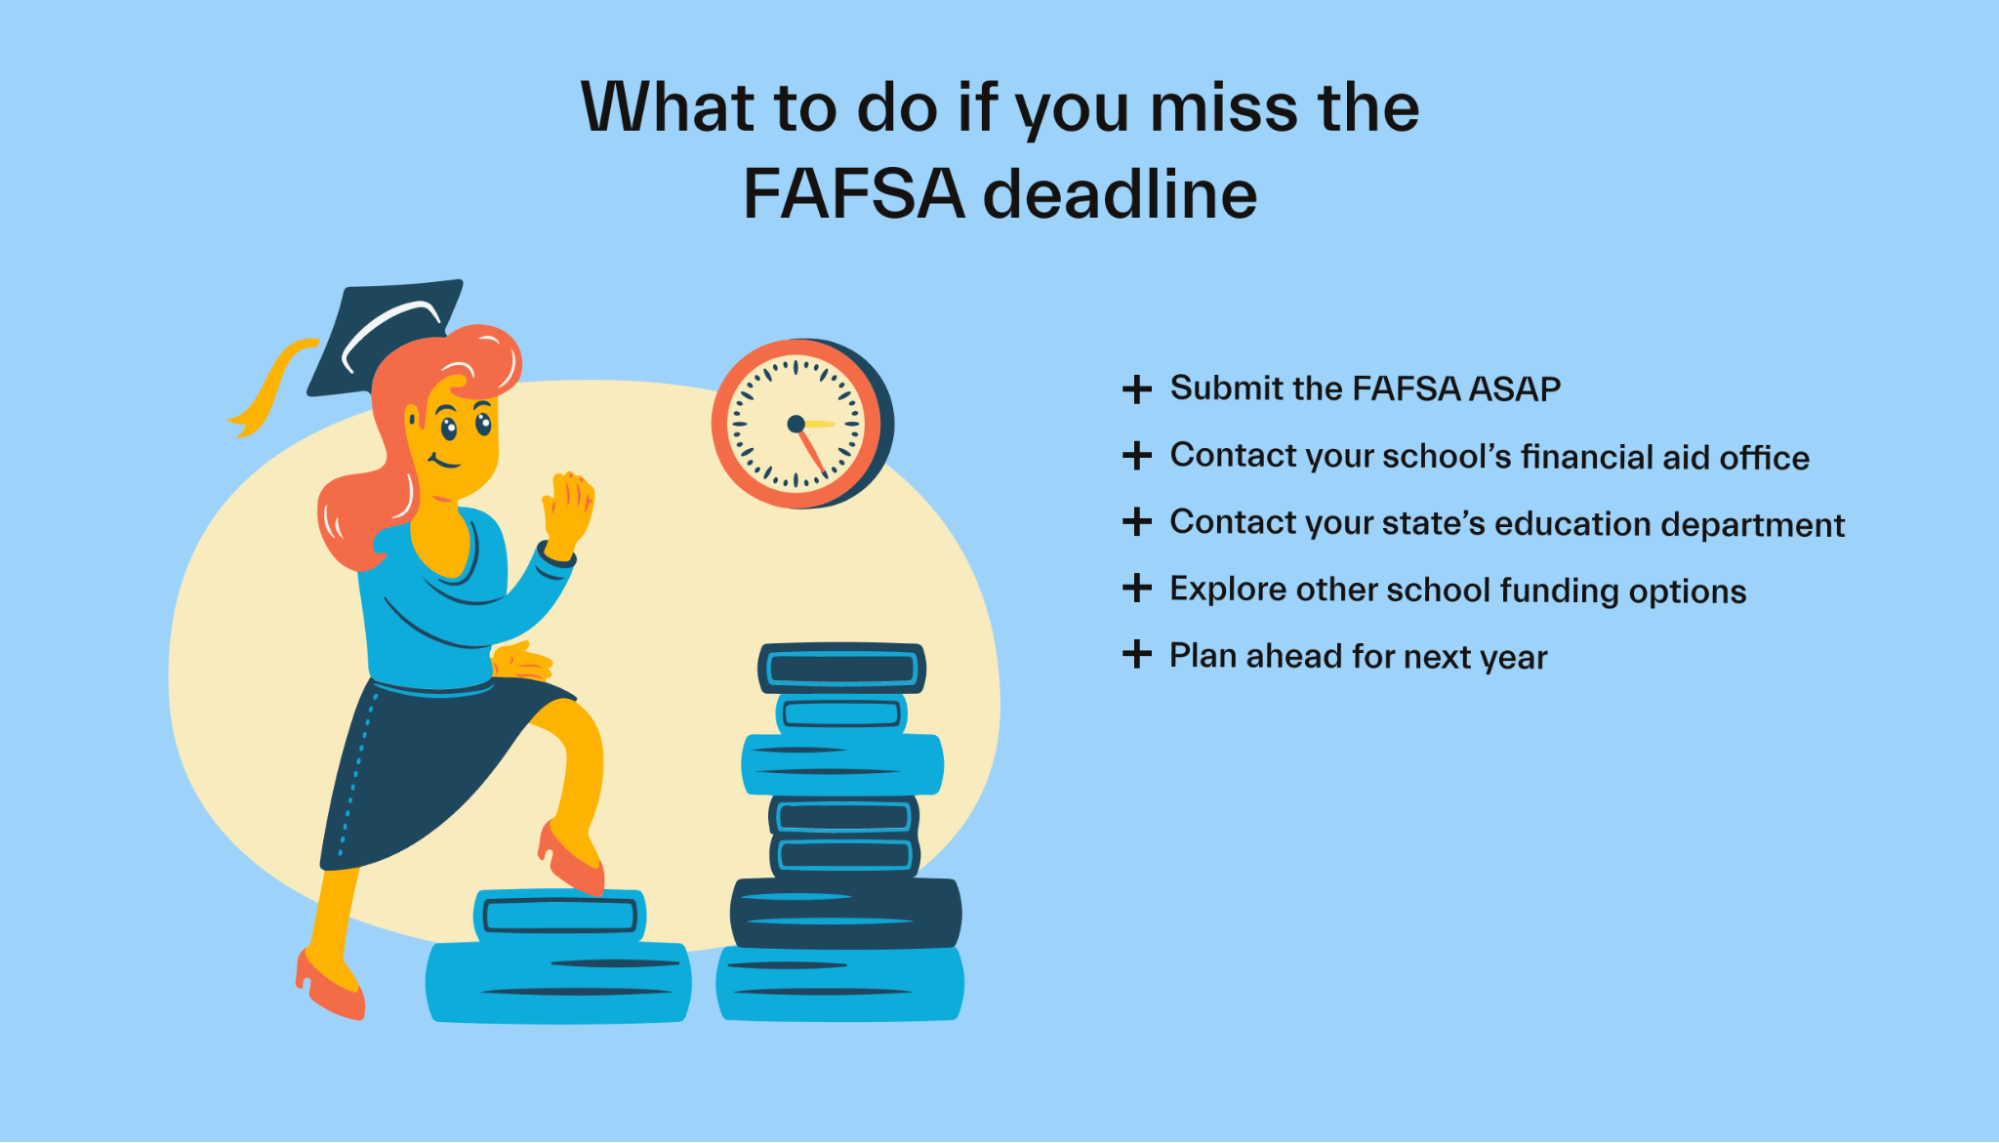 What to do if you miss the FAFSA deadline